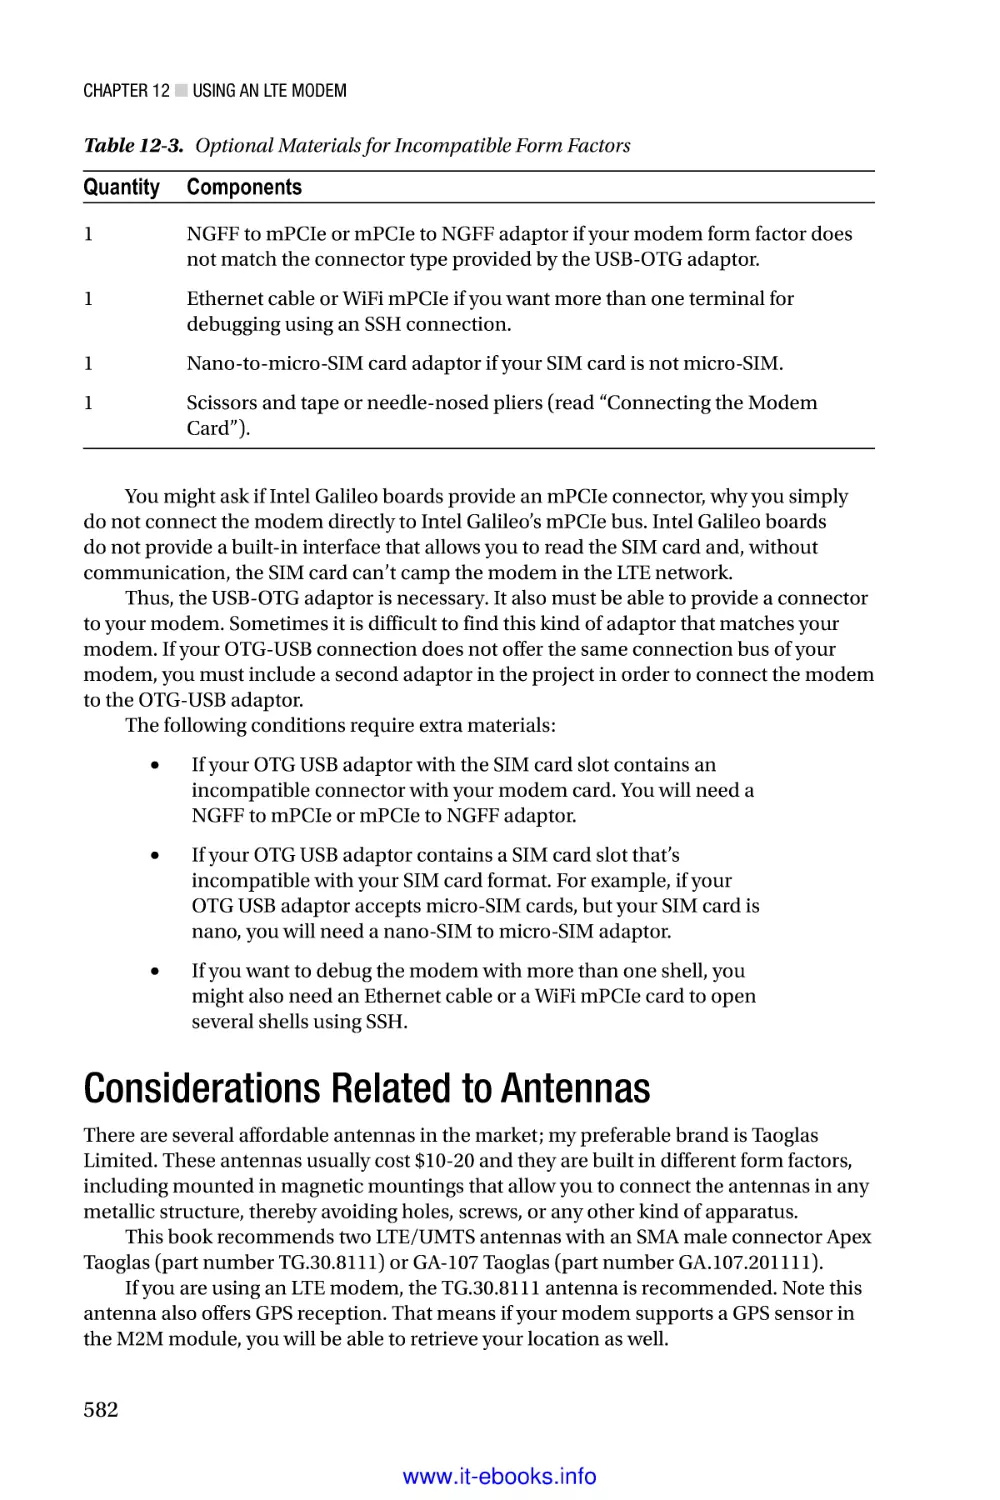 Considerations Related to Antennas